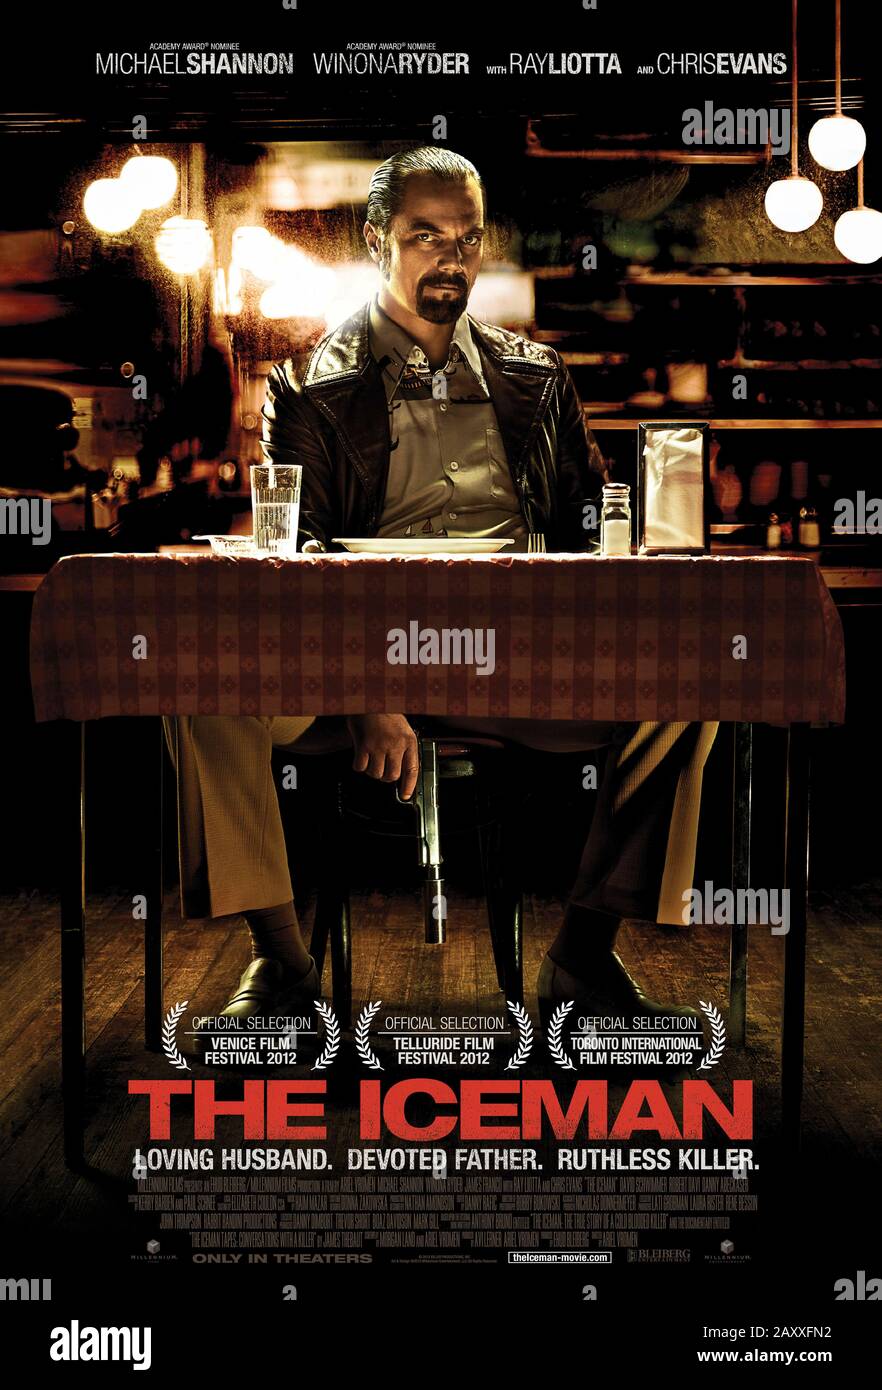 The Iceman (2012) directed by Ariel Vromen and starring  Michael Shannon, Winona Ryder, Chris Evans, James Franco and Ray Liotta. True story of notorious contract killer Richard Kuklinski who hid his profession from his family. Stock Photo